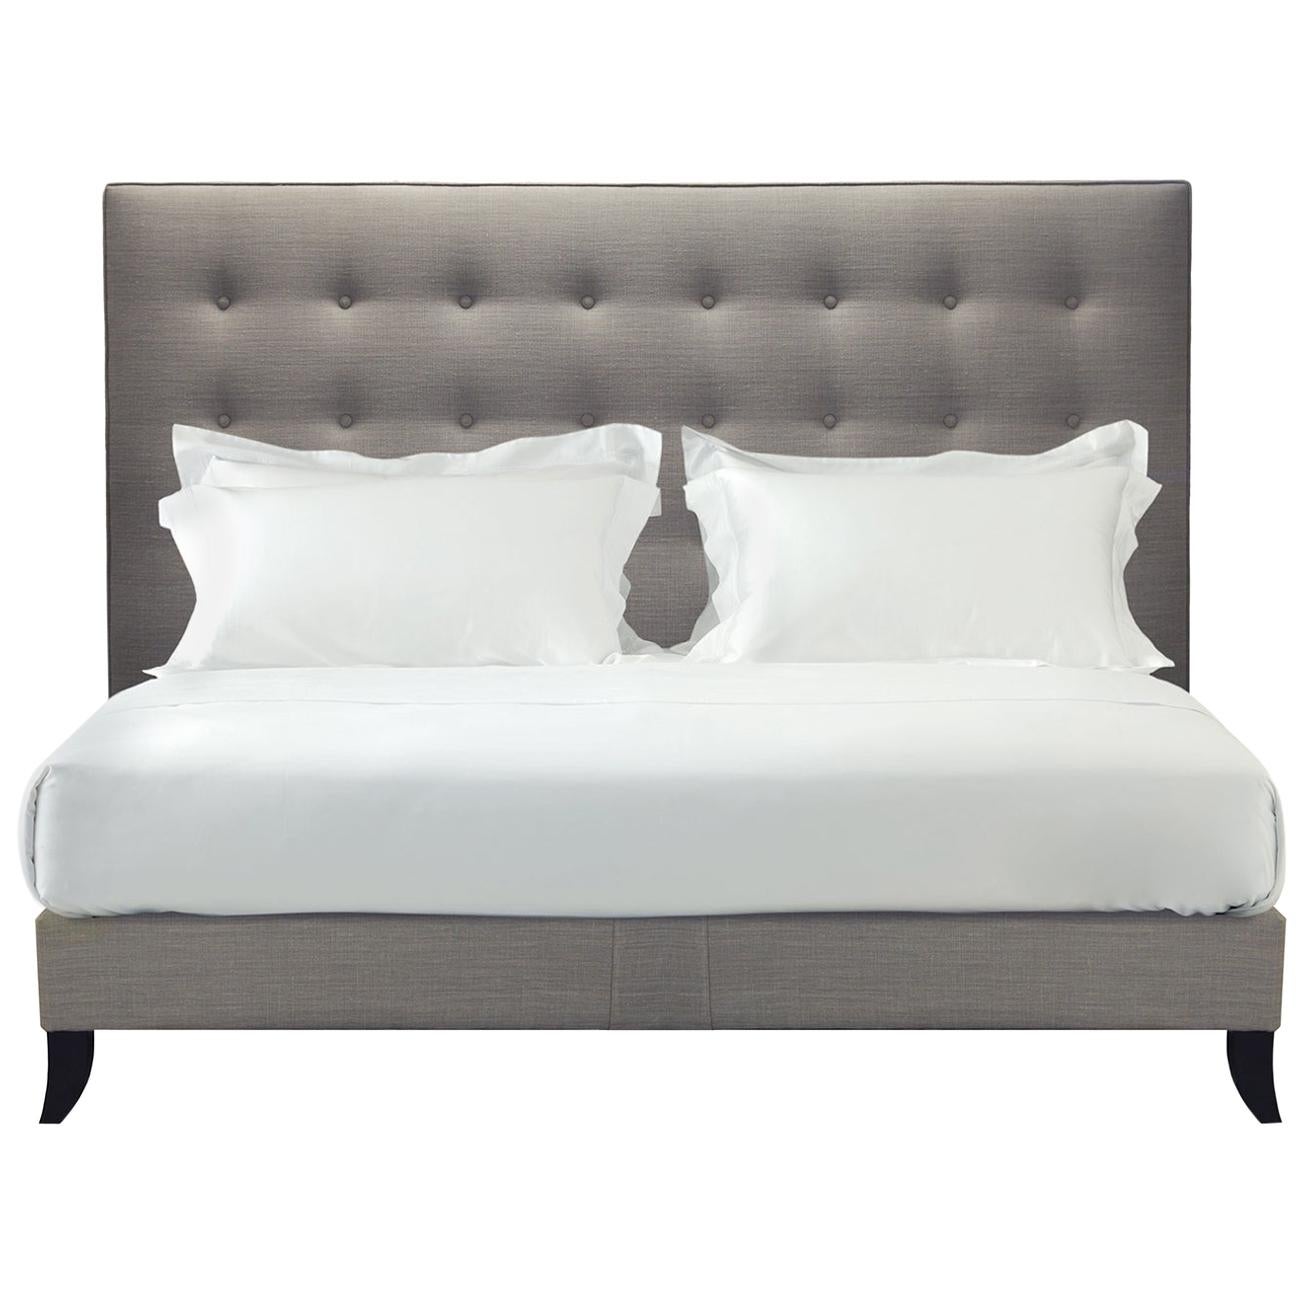 Handcrafted Savoir Holly Headboard in Grey Linen & Nº3 Bed Set, Queen Size For Sale